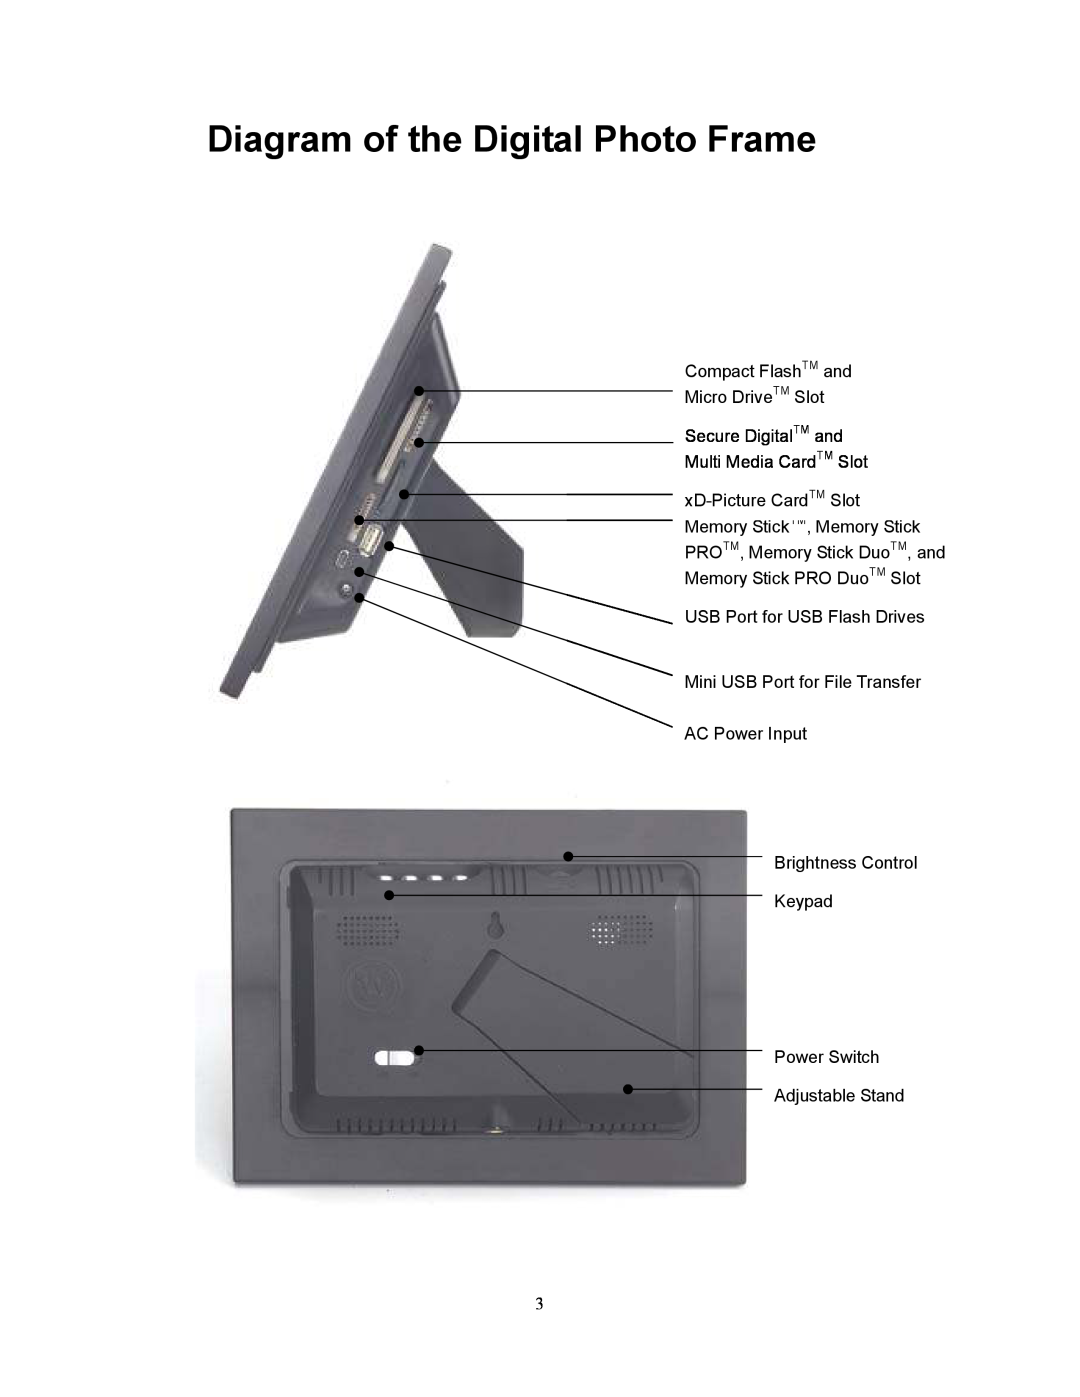 Westinghouse DPF-0701 Diagram of the Digital Photo Frame, Compact FlashTM and Micro DriveTM Slot Secure DigitalTM and 